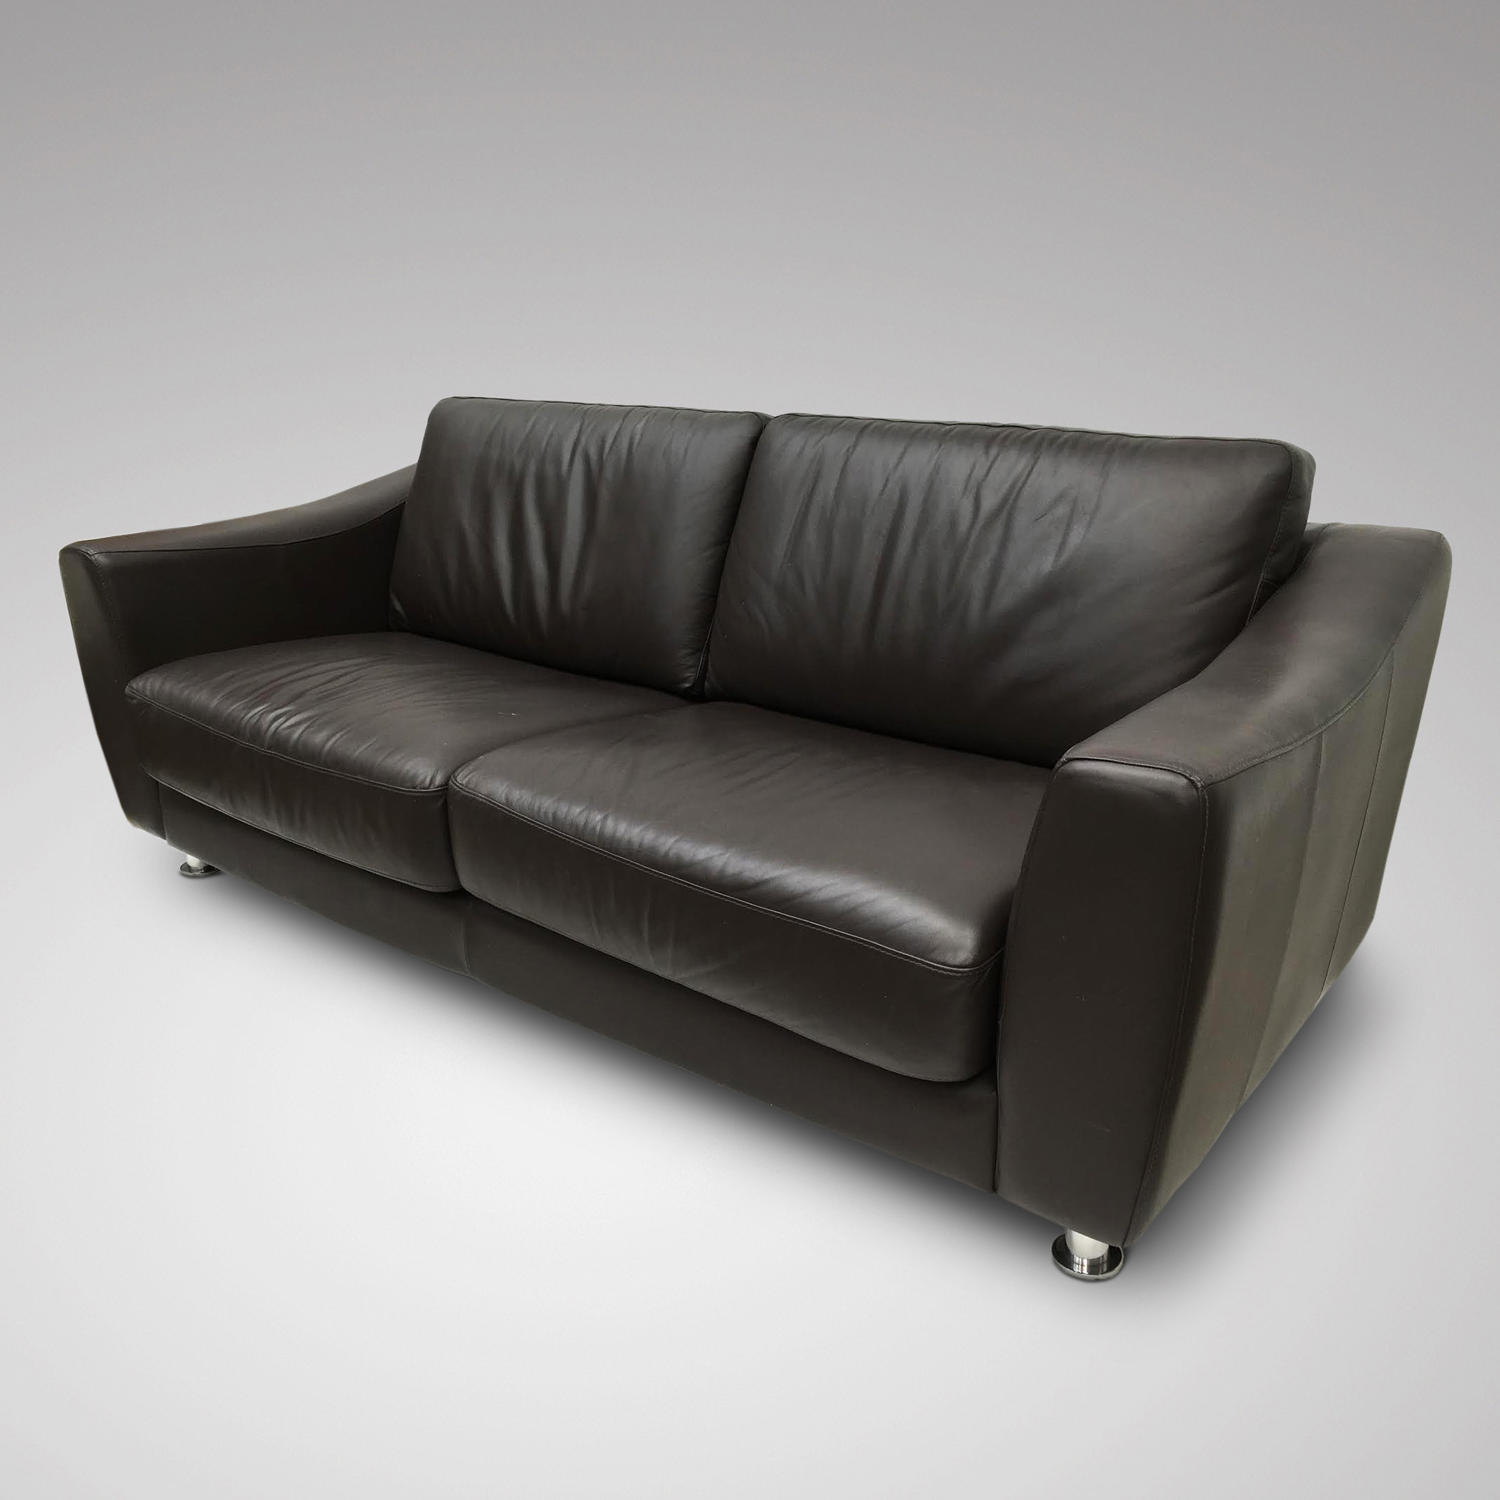 A MODERN DARK BROWN LEATHER UPHOLSTERED SETTEE